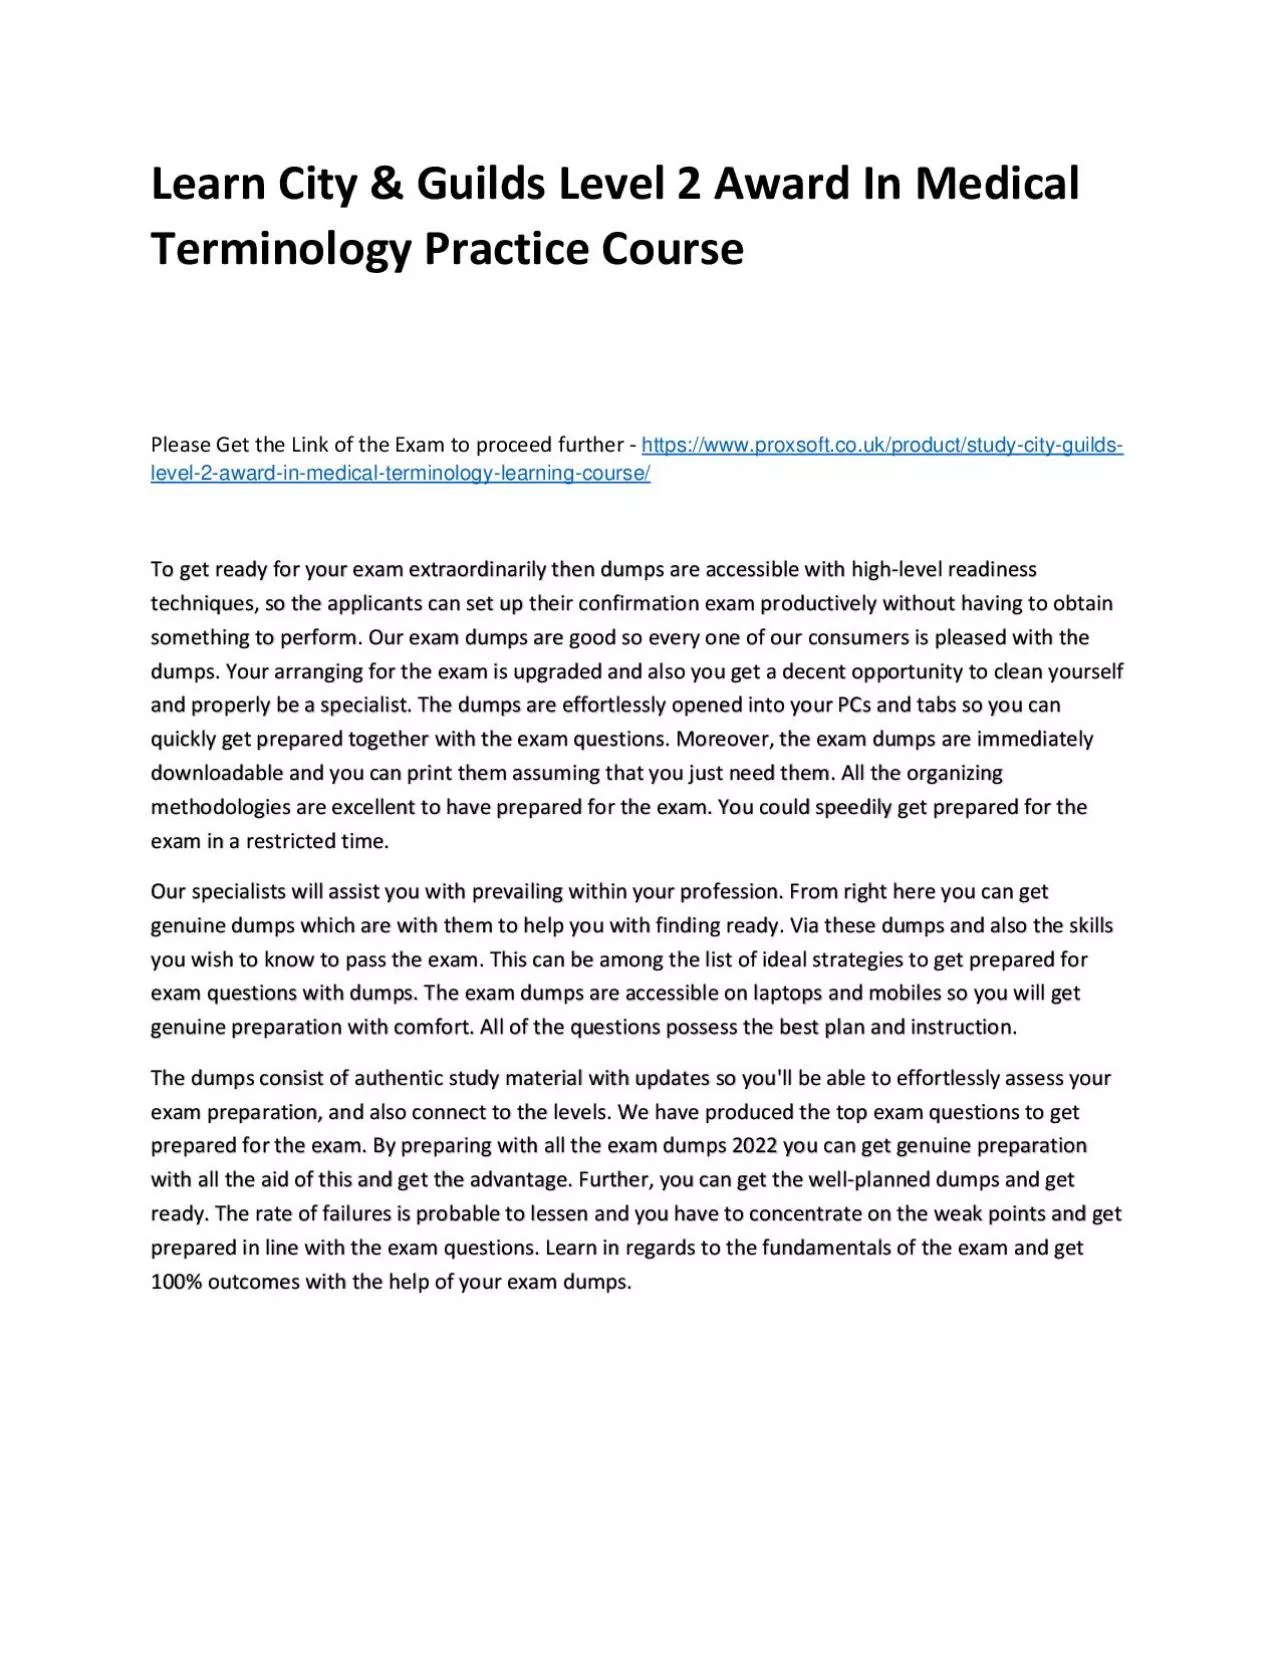 Learn City & Guilds Level 2 Award In Medical Terminology Practice Course